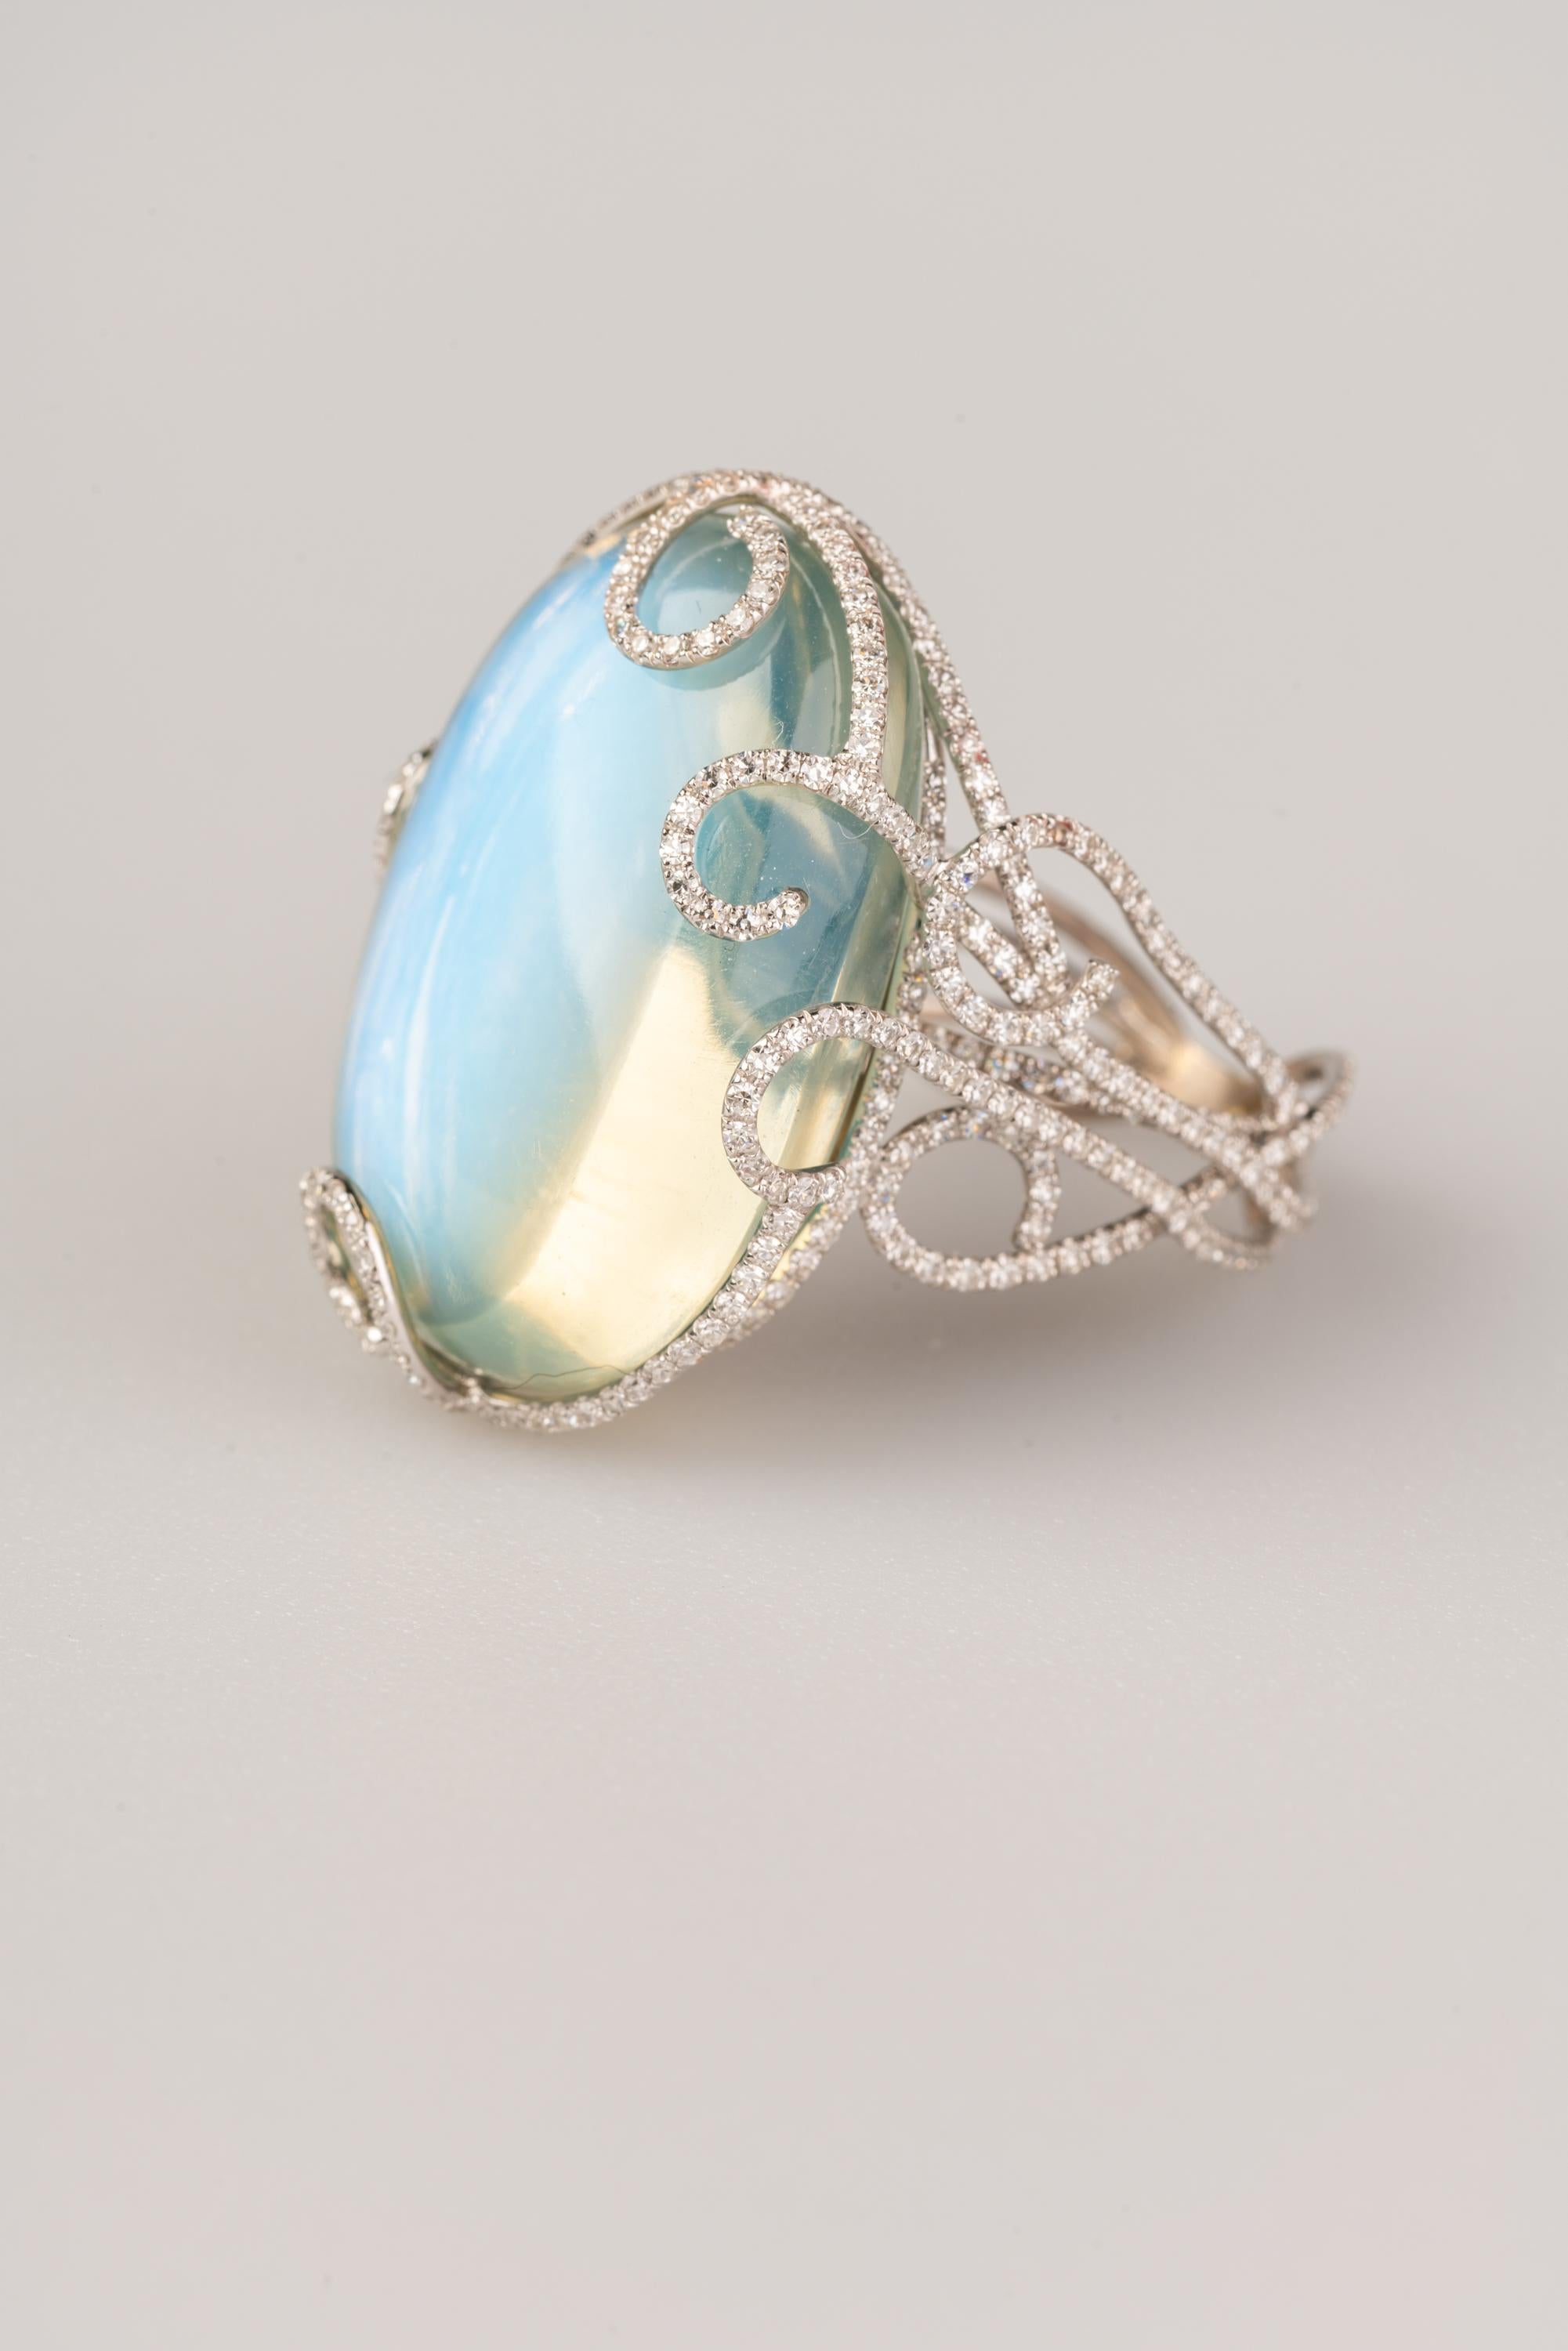 Contemporary 40 Carat Blue Sheen Moonstone Ring with 1.92 Carat of Diamonds